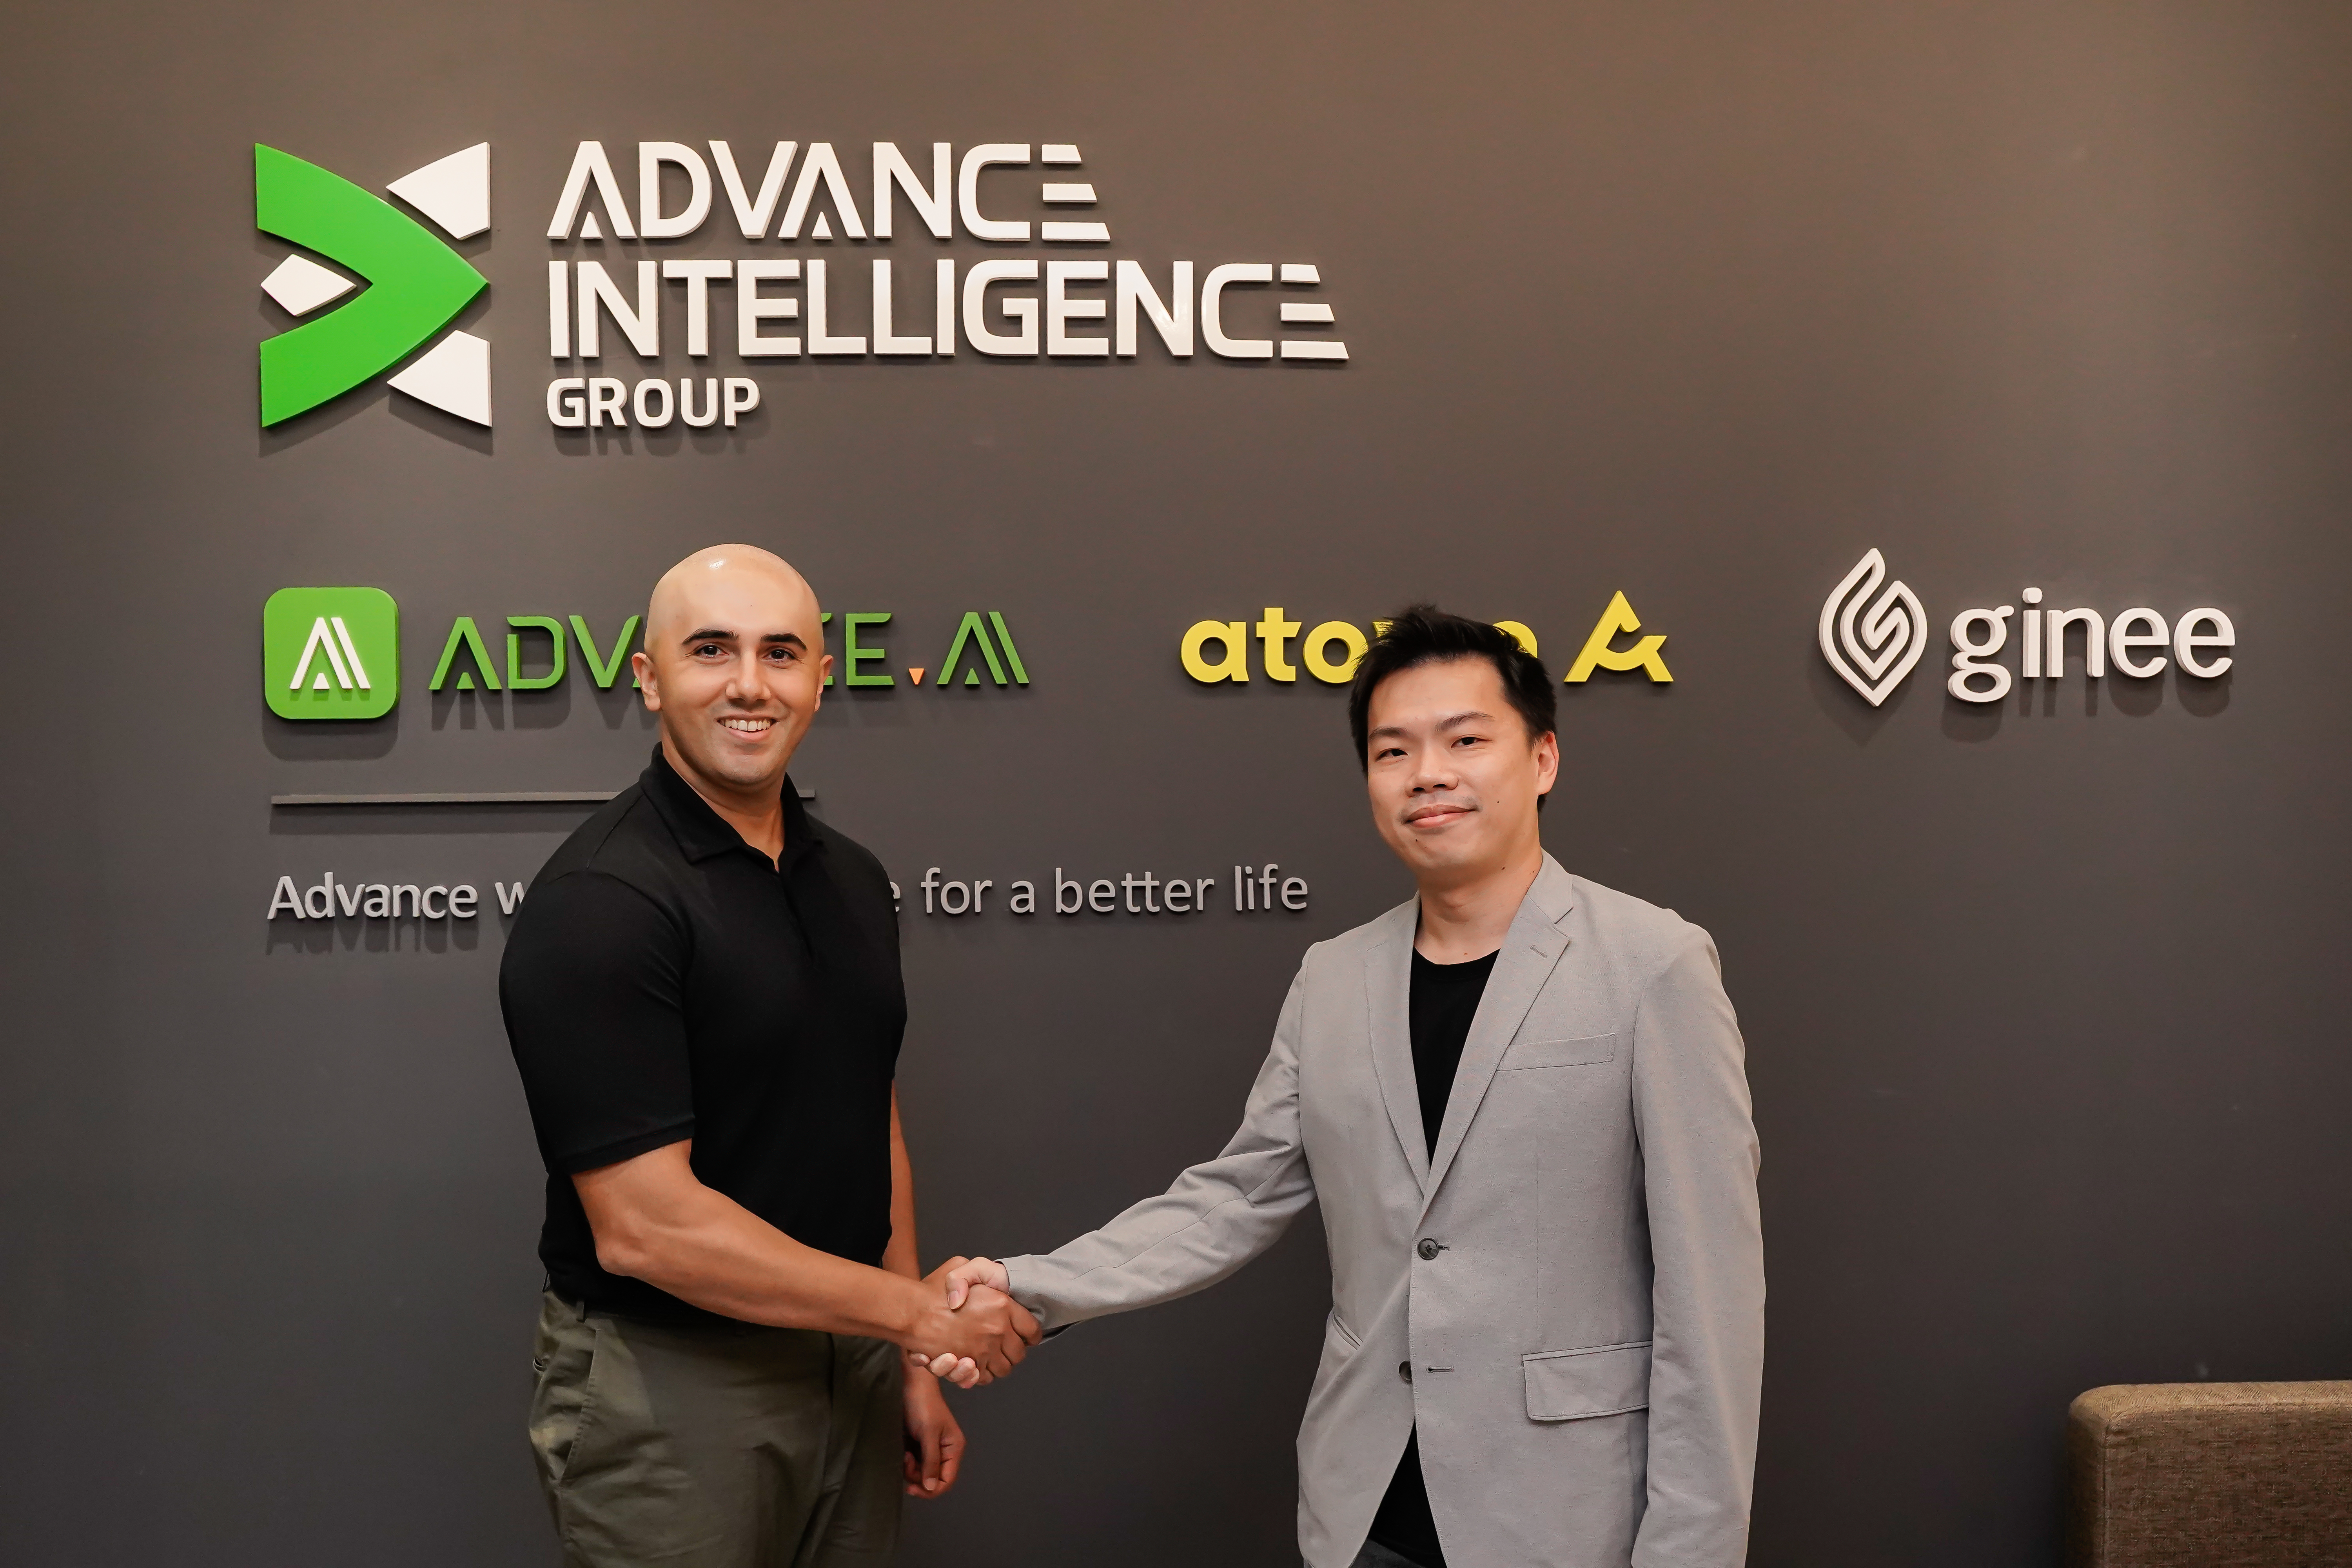 (from left): Umair Javed, senior vice president, M&A and corporate development at Advance Intelligence Group with Sean Lam, chief executive officer, Jewel Paymentech